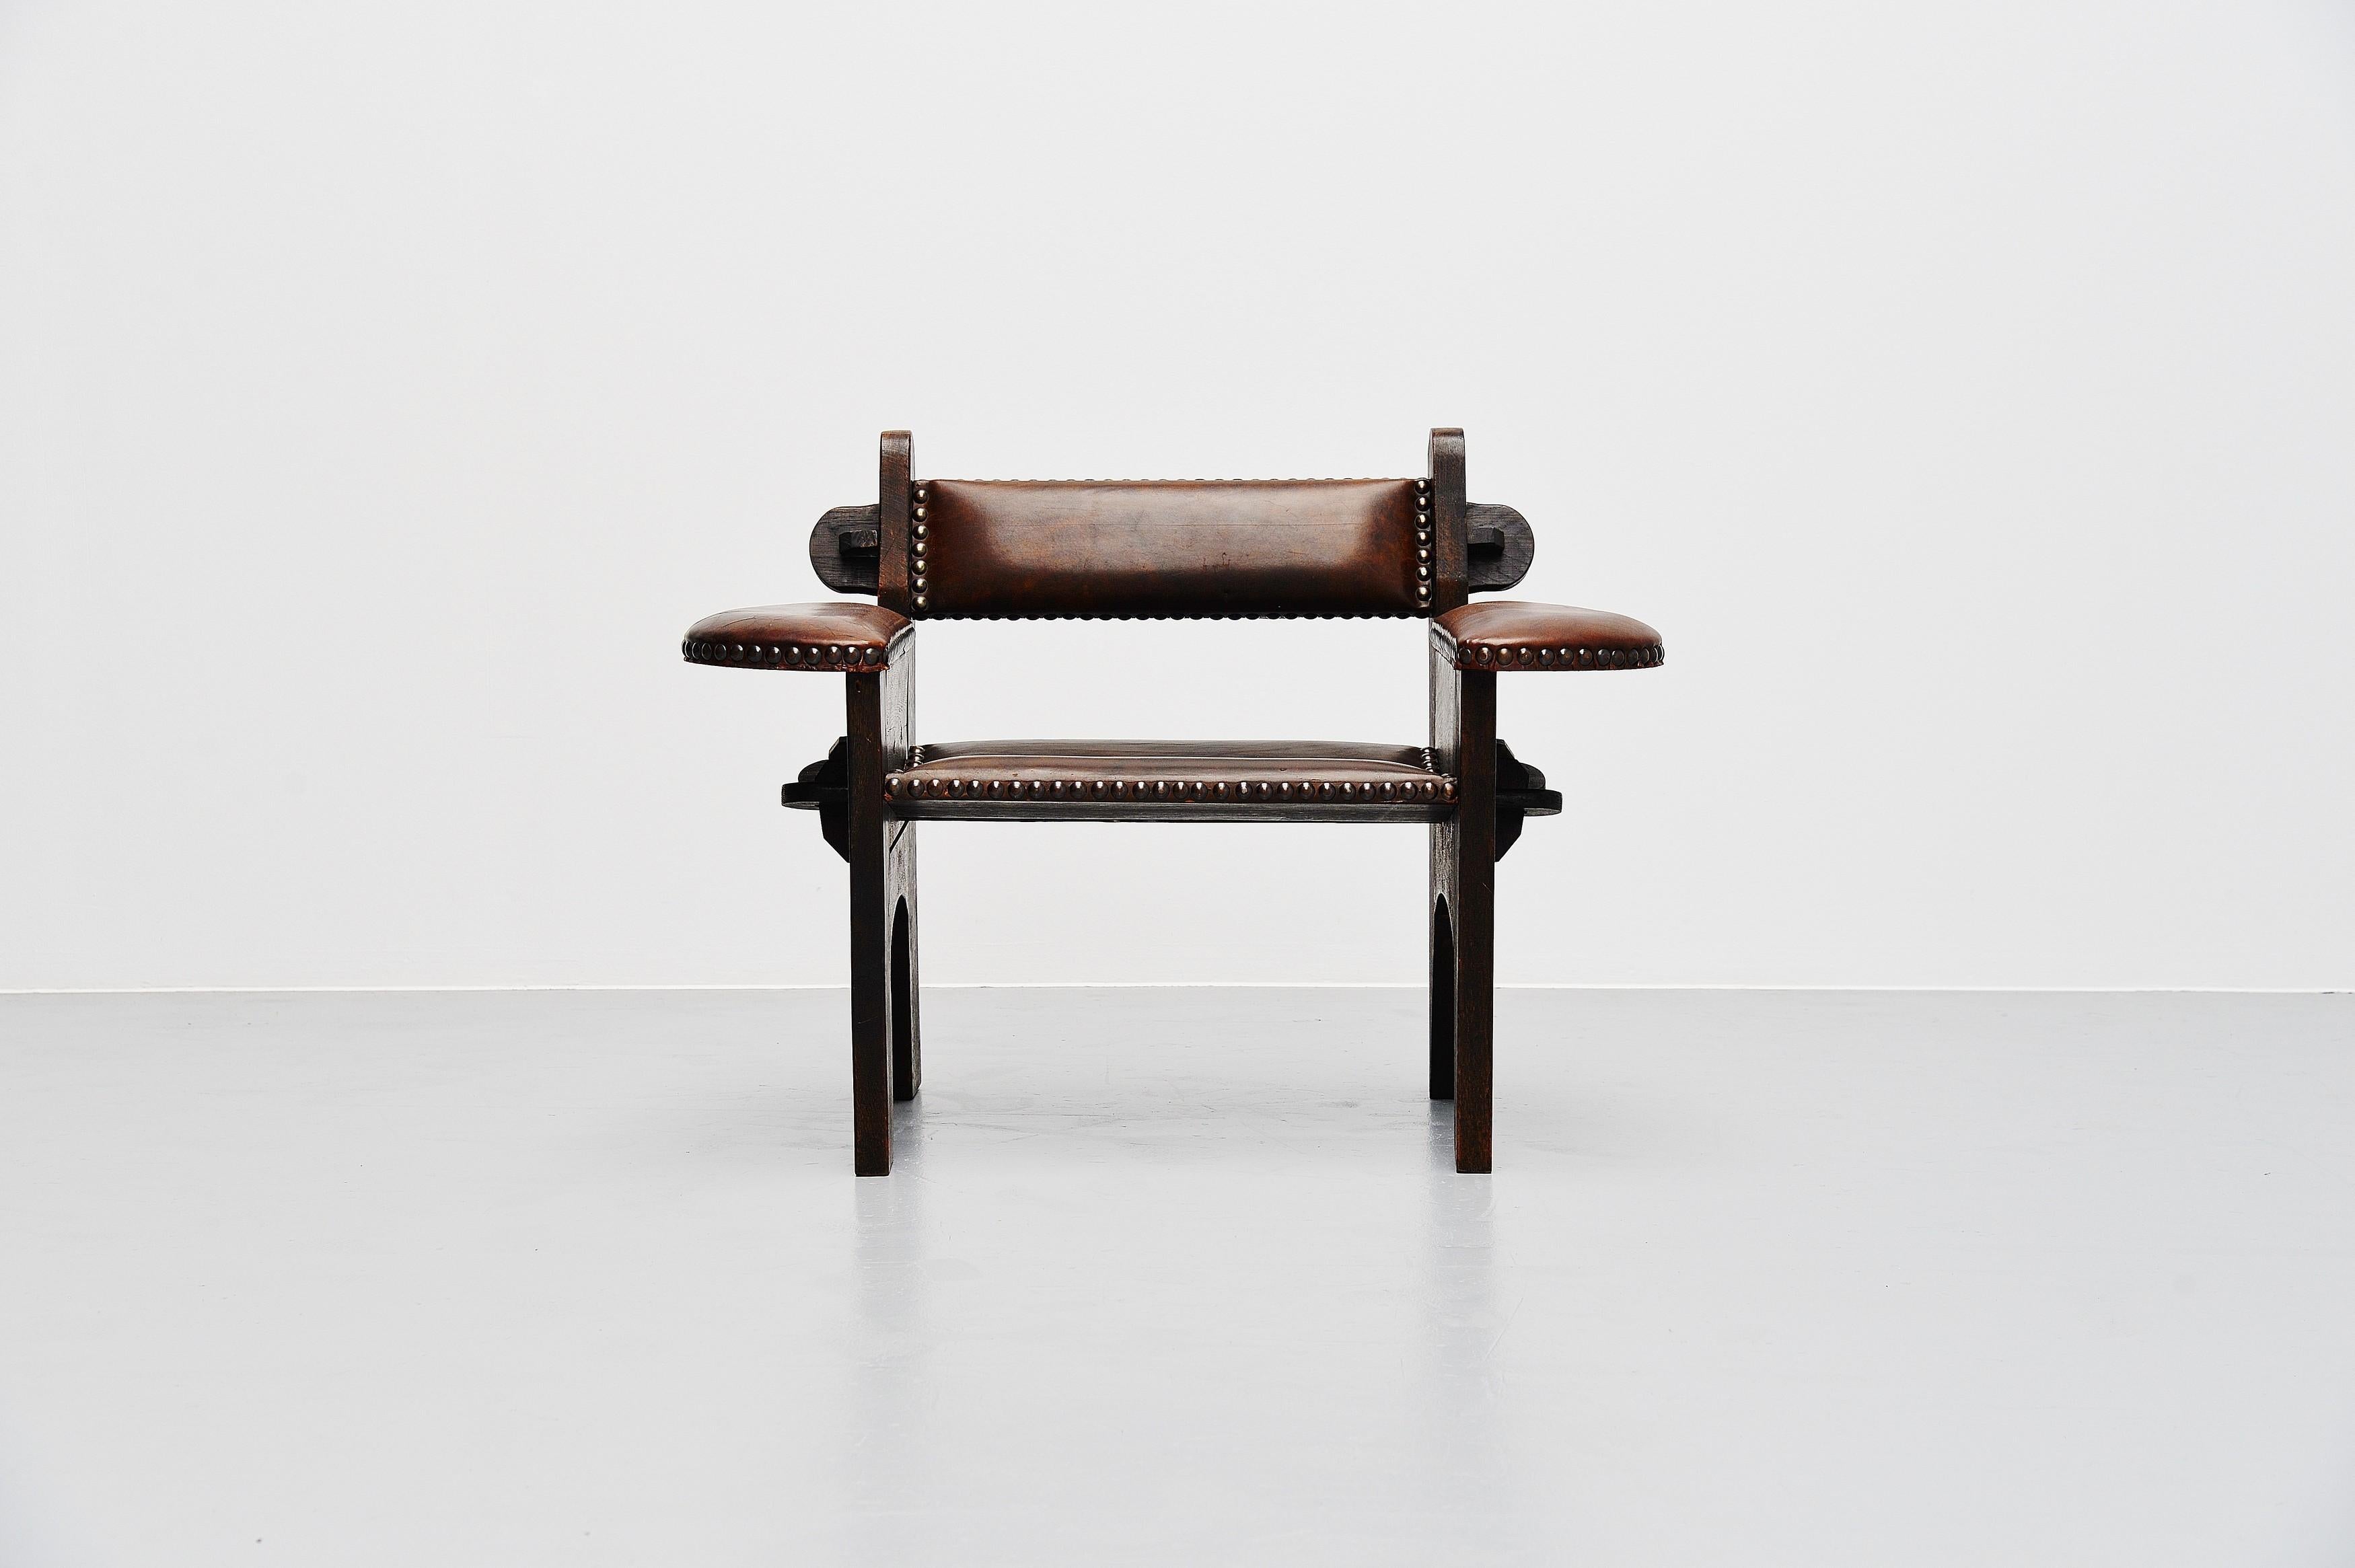 Stunning brutalist armchair attributed to Giacomo Balla, Italy, 1950s. This solid ash wooden chair has a super rough and yet elegant feel. It is dark stained and has a brown leather seat and back, finished with copper nails. The chair is not glued